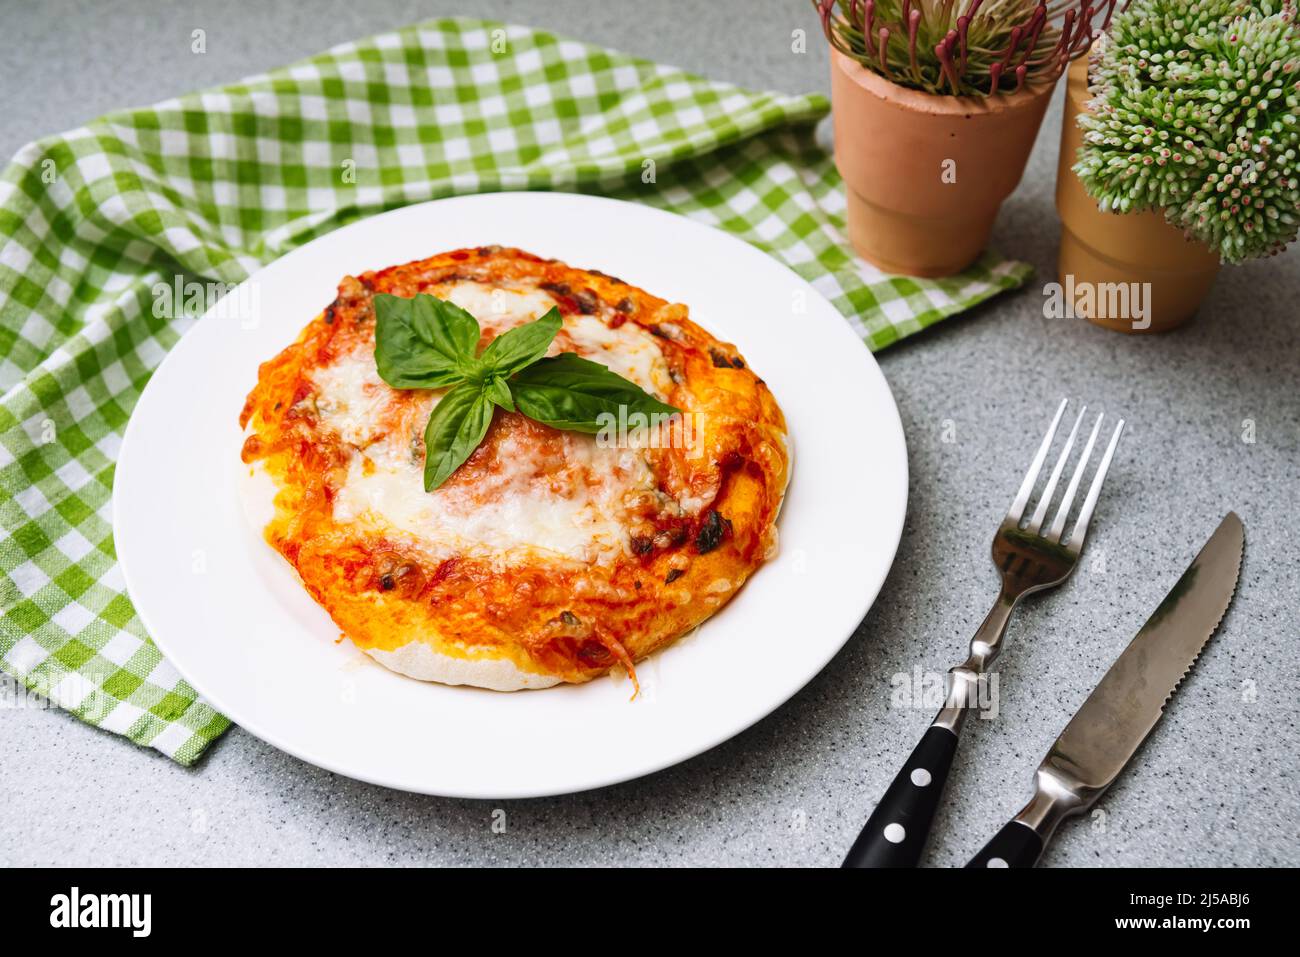 Homemade Margherita pizza with cheese, tomato sauce and basil leaf with crispy crust. Stock Photo